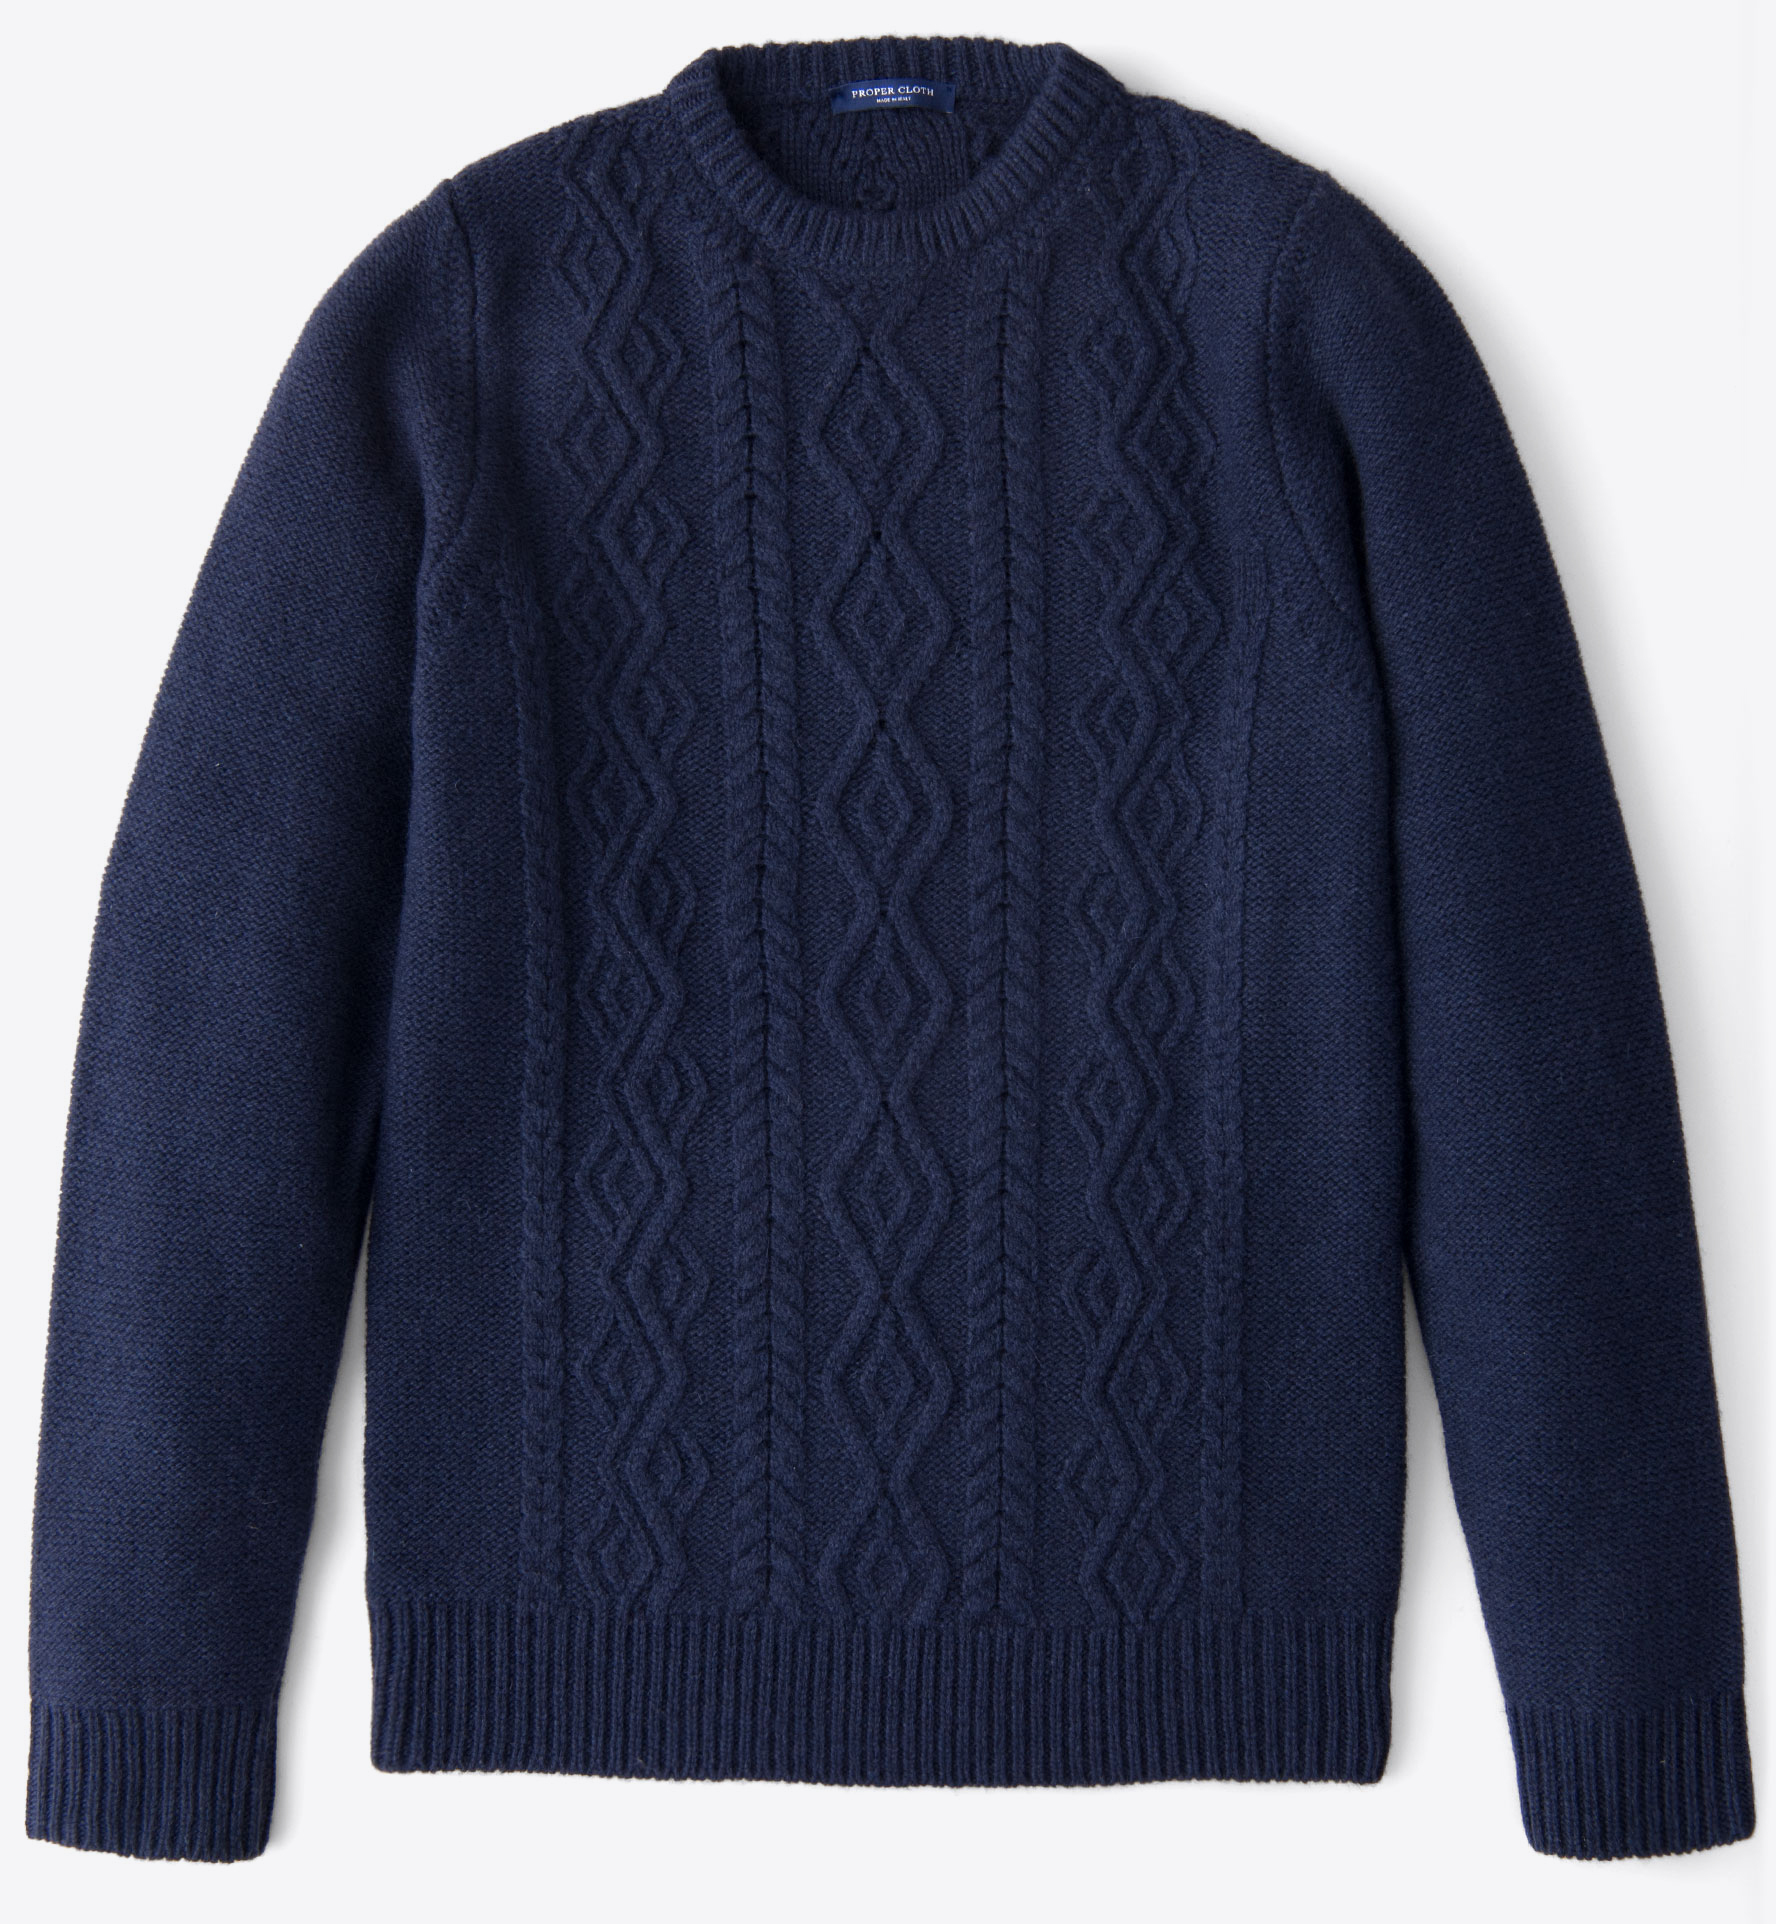 Navy Wool and Cashmere Aran Sweater by Proper Cloth